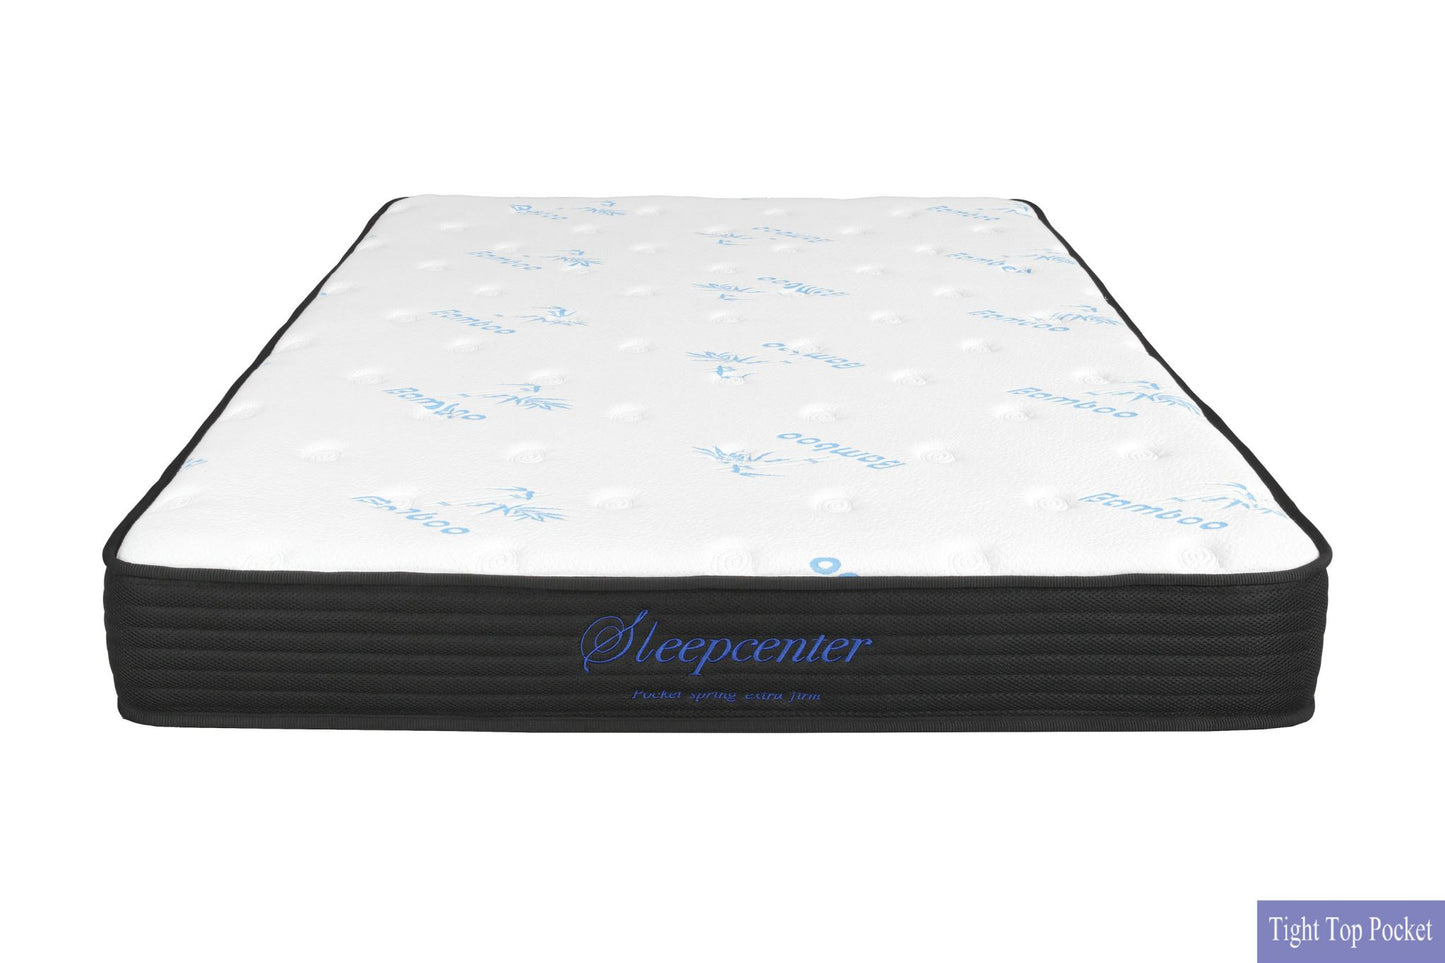 Queen Tight Top 5 Zone Pocket Spring Mattress&3 drawers bed base with headboard Combo